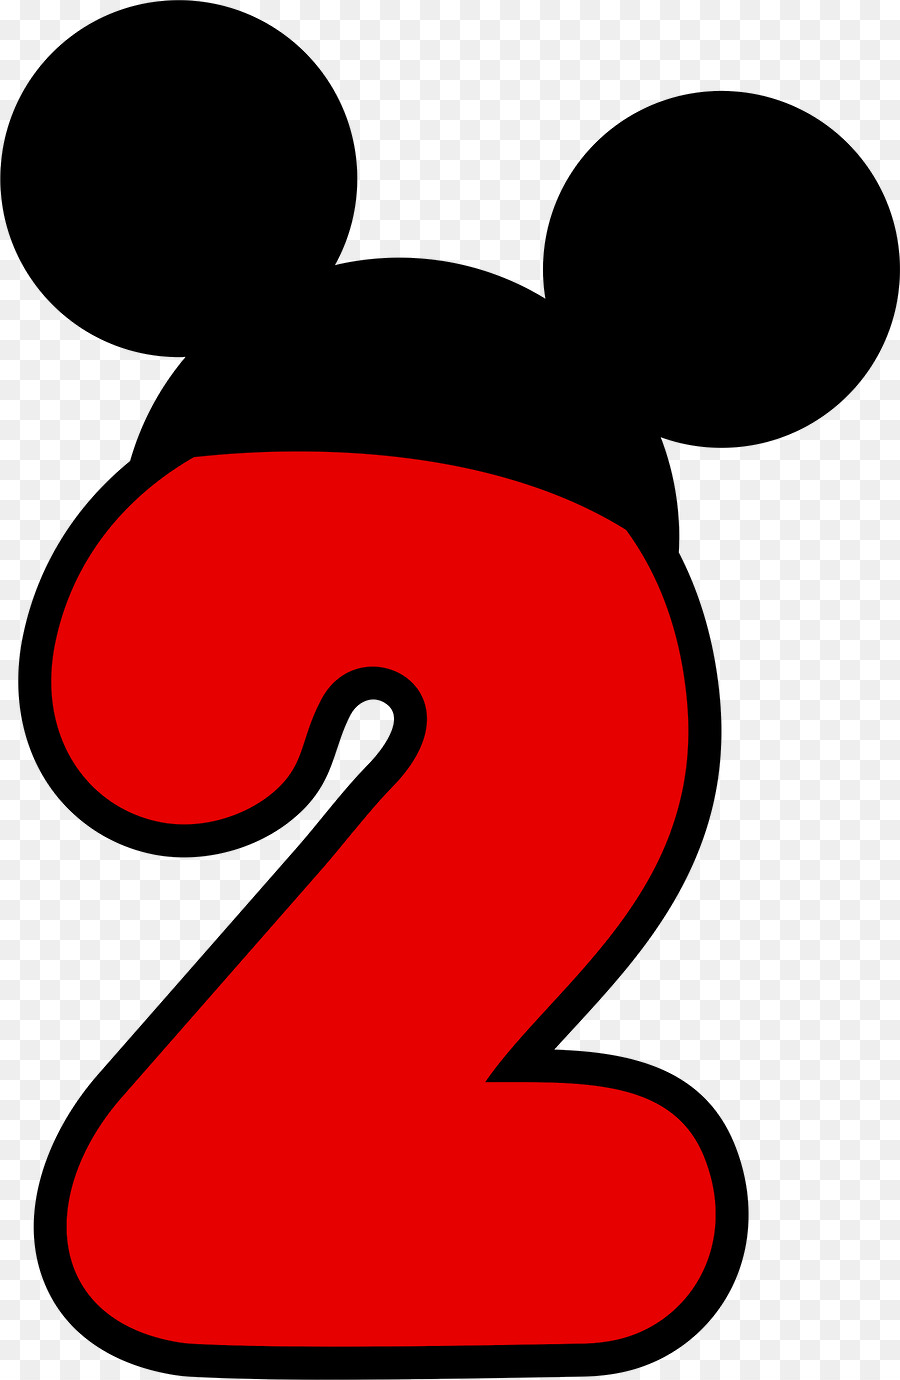 2 clipart mickey mouse. Epic the power of